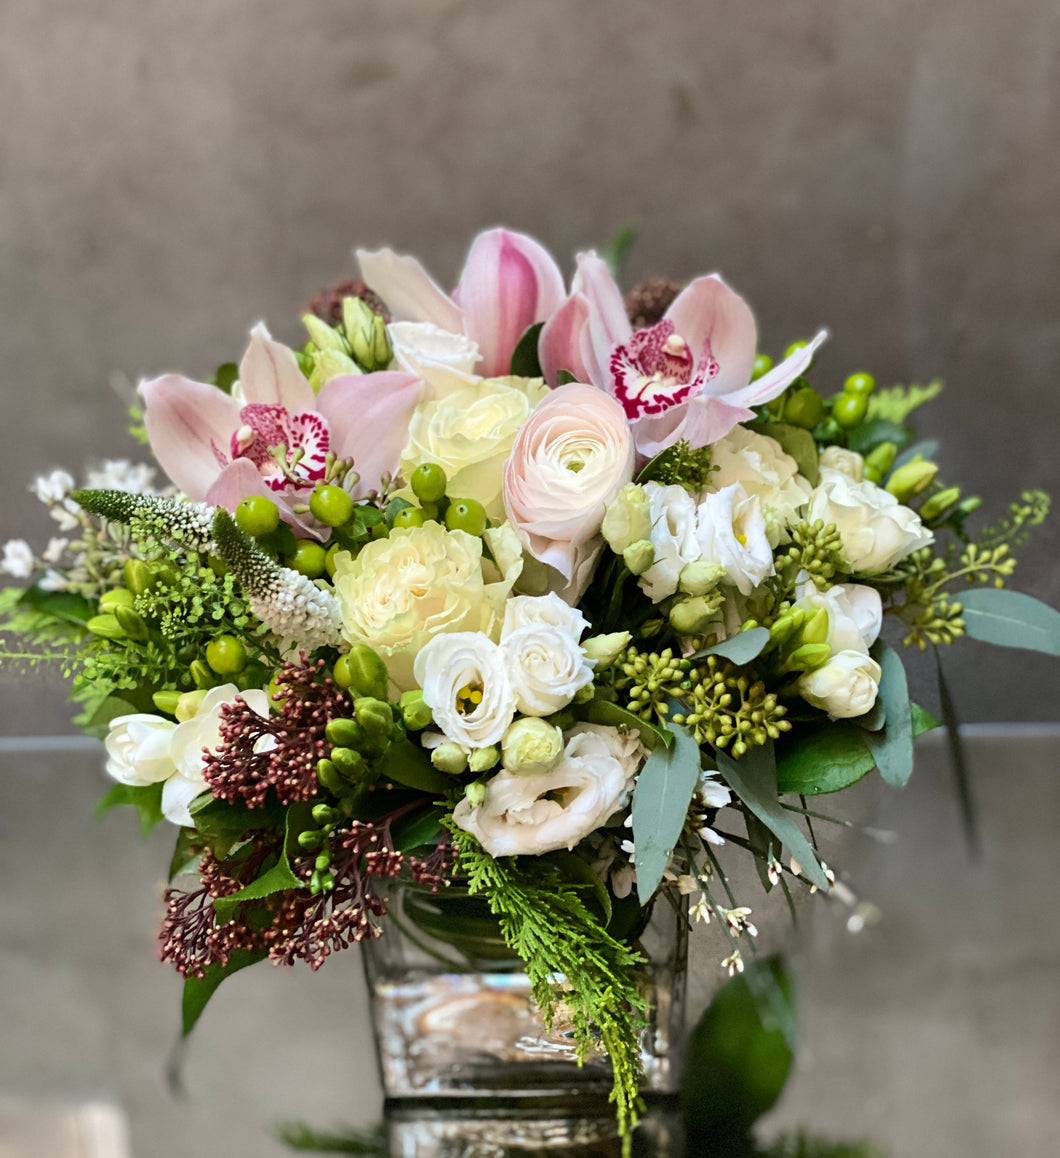 F60 - Soft Pastel Arrangement (Cymbidium orchid colour based on availability - white, light pink or dark pink)